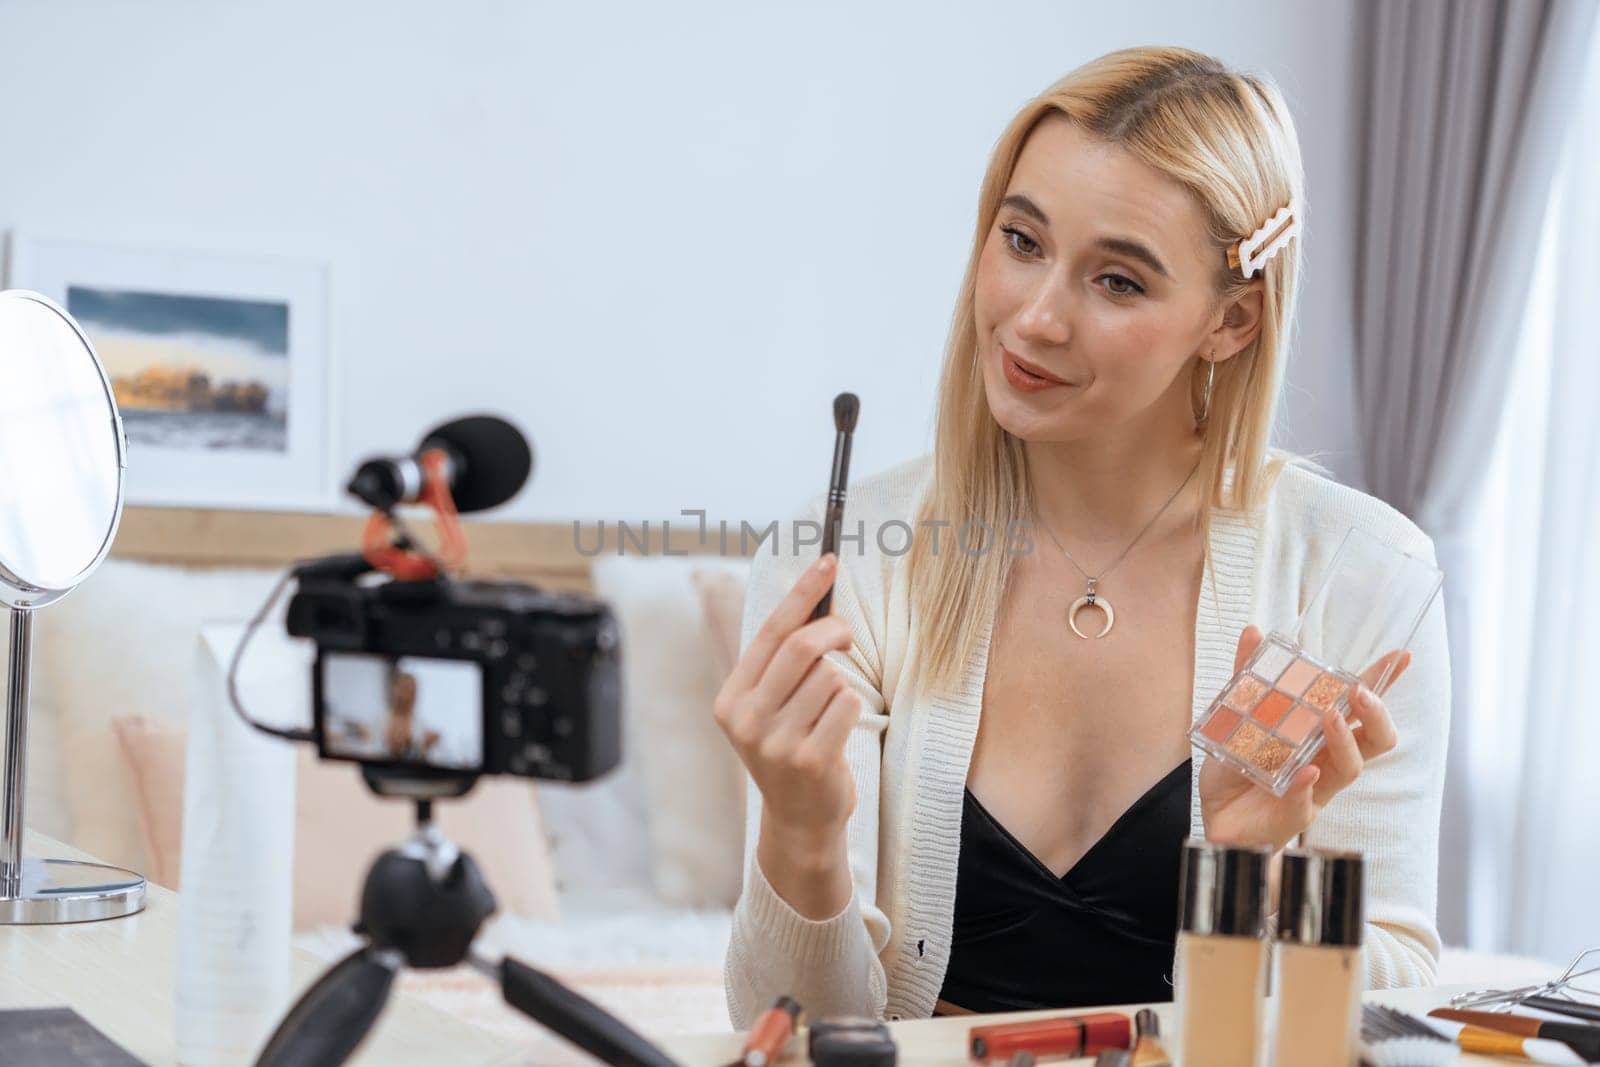 Young woman making beauty and cosmetic tutorial video content for social media. Beauty blogger smiles to camera while showing how to beauty care to audience or followers. Blithe